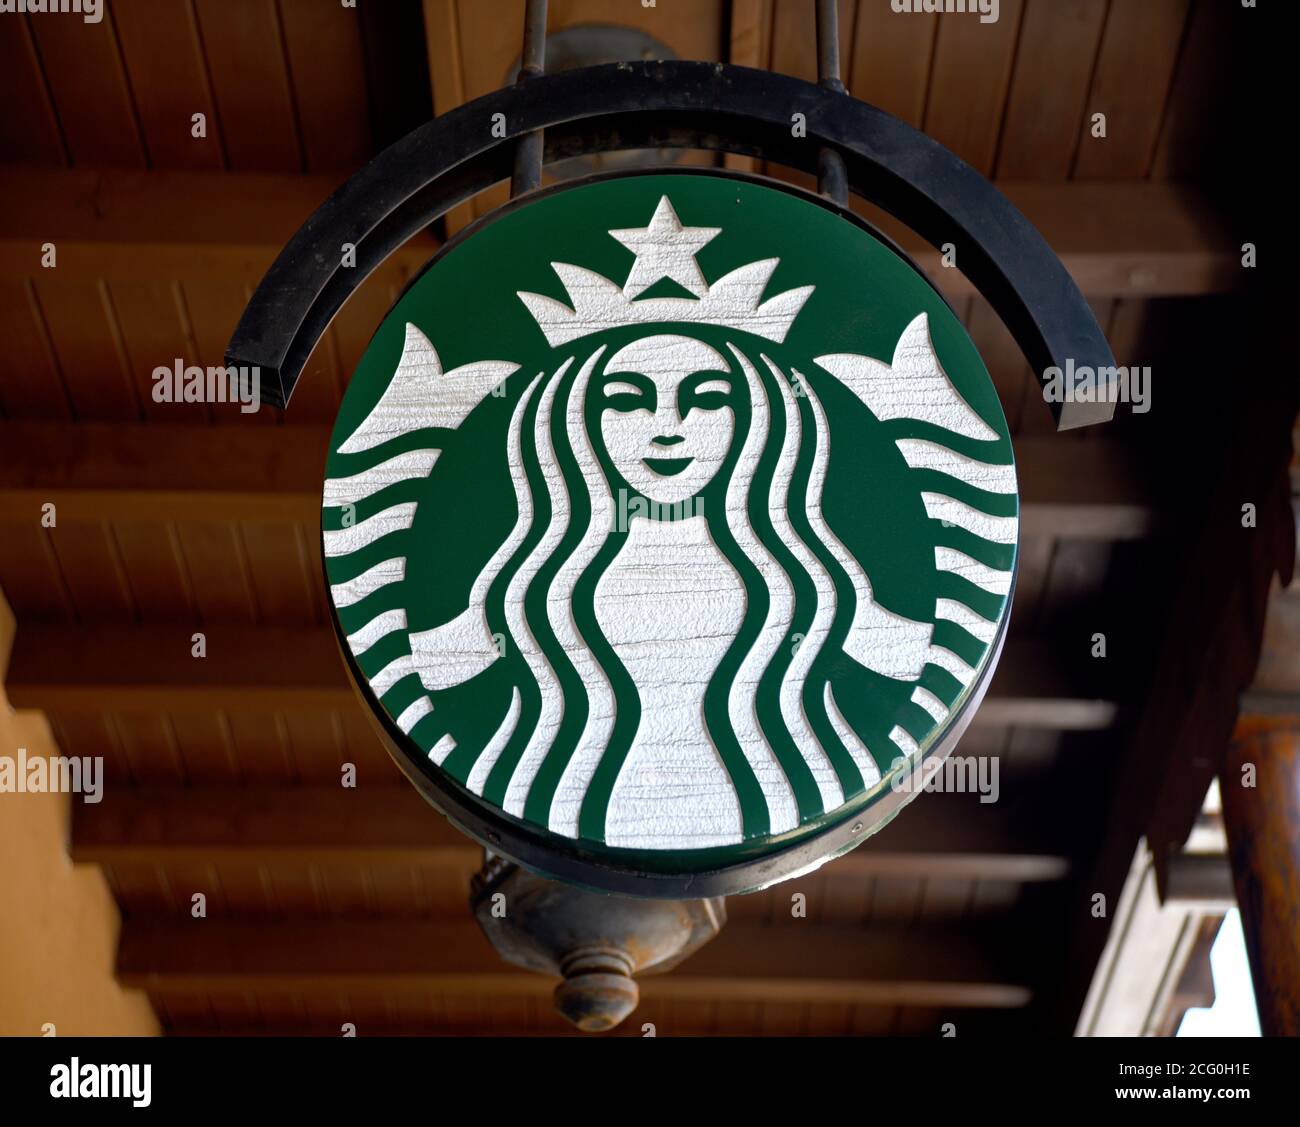 A business sign with the Starbucks Coffee logo hangs over a Starbucks Coffee shop in Santa Fe, New Mexico. Stock Photo